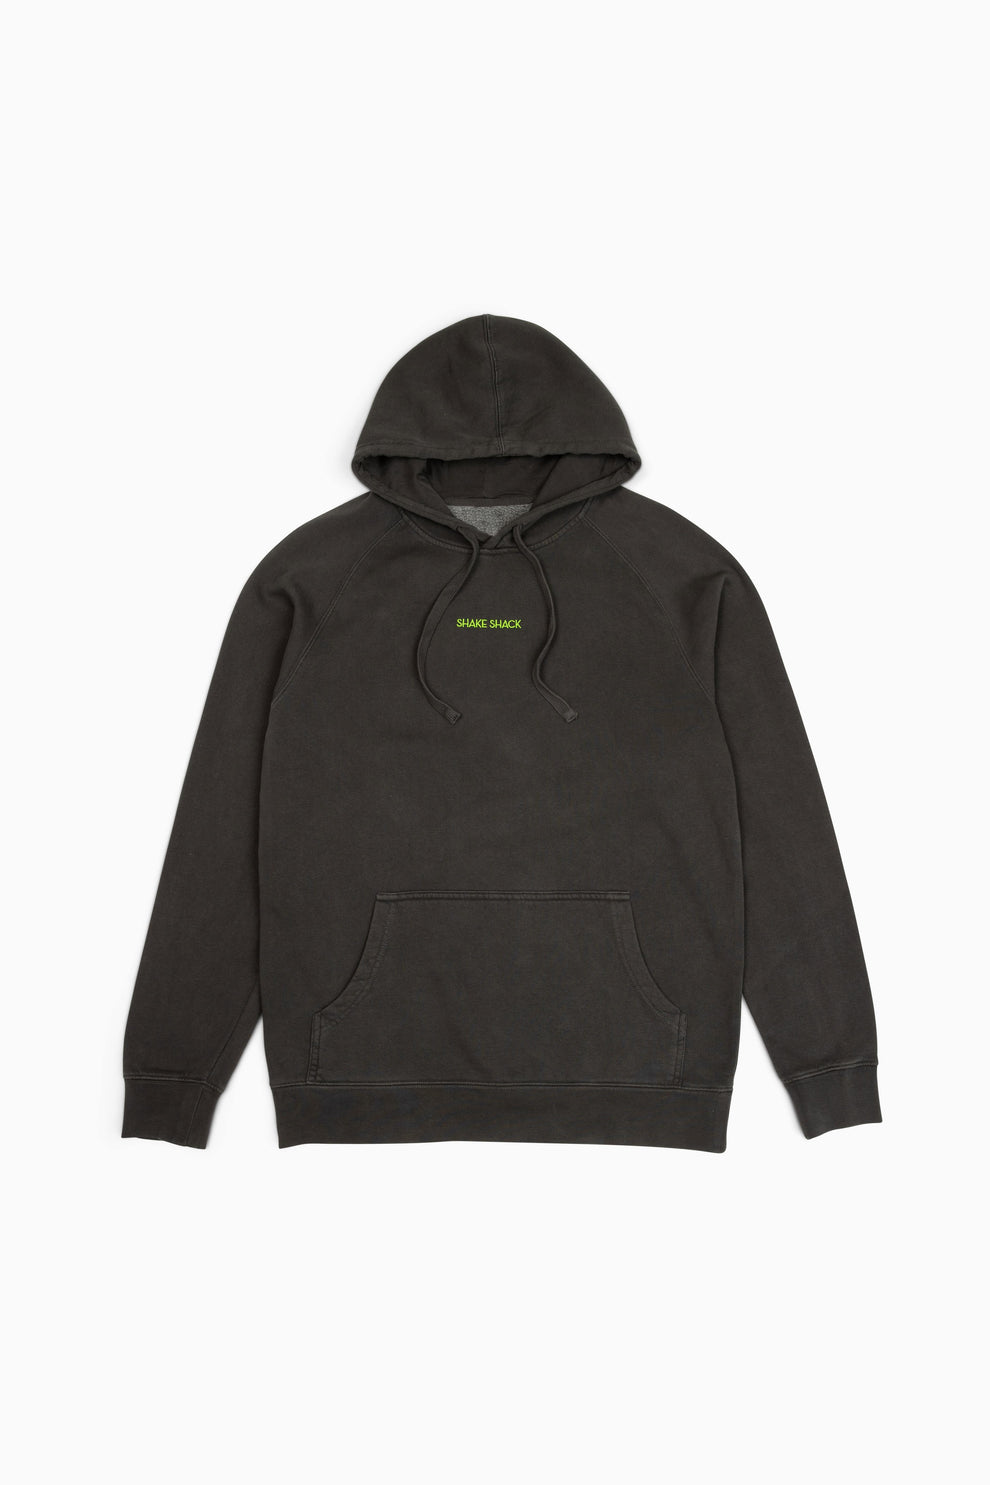 Black hoodie with the words "Shake Shack" centered below the neck and an embroidered Shake Shack logo on the right sleeve